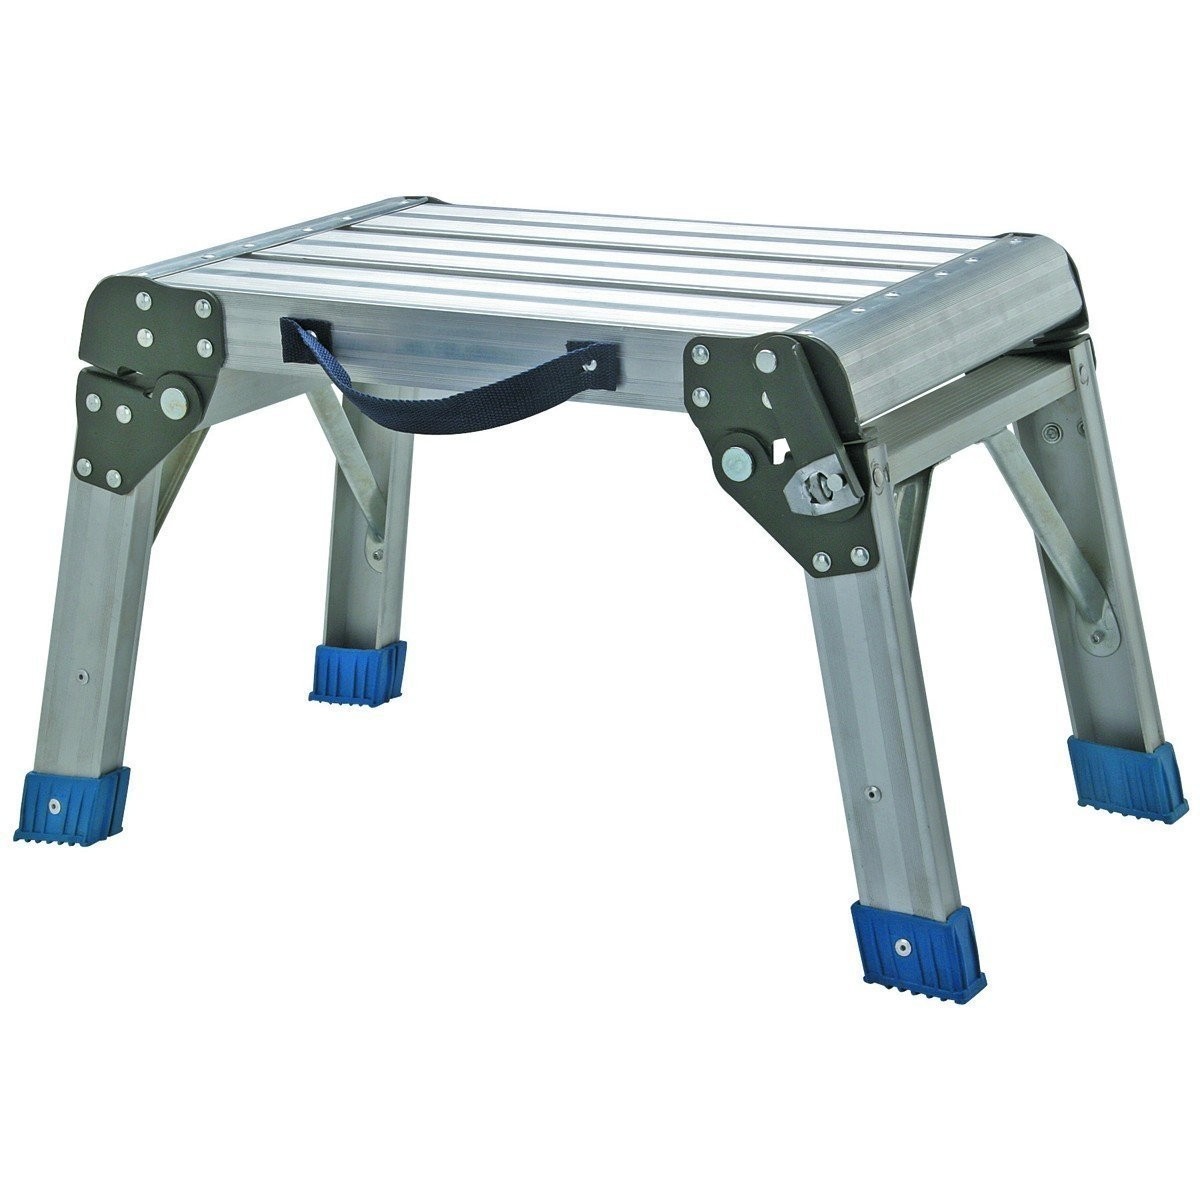 Step Stool and Working Platform 350 Lbs. Capacity Foldable Anodized Aluminum